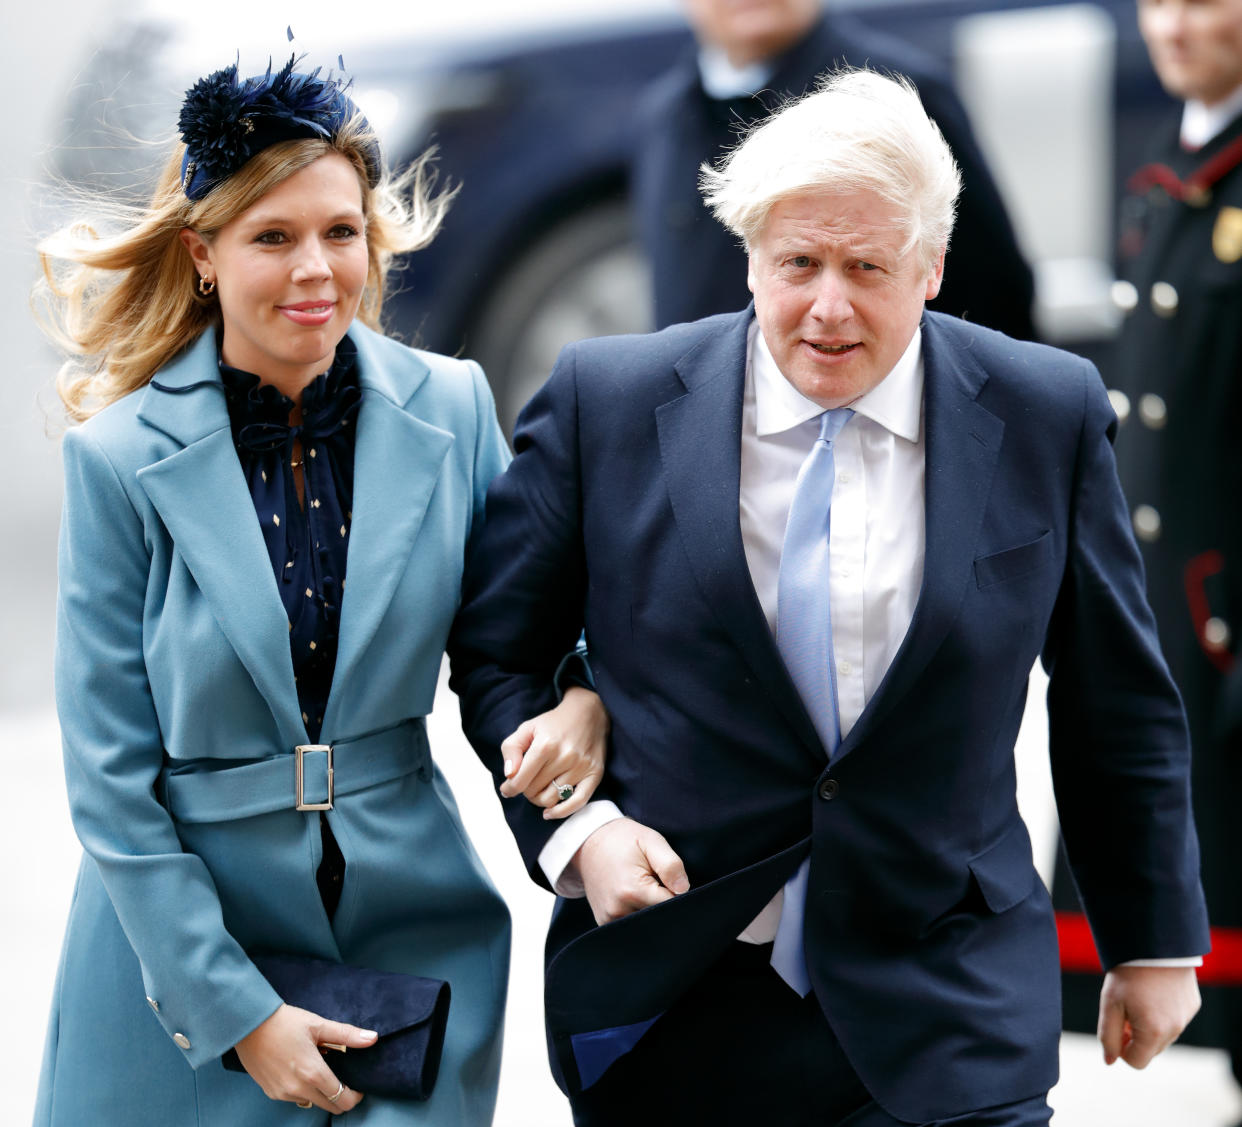 LONDON, UNITED KINGDOM - MARCH 09: (EMBARGOED FOR PUBLICATION IN UK NEWSPAPERS UNTIL 24 HOURS AFTER CREATE DATE AND TIME) Carrie Symonds and Prime Minister Boris Johnson attend the Commonwealth Day Service 2020 at Westminster Abbey on March 9, 2020 in London, England. The Commonwealth represents 2.4 billion people and 54 countries, working in collaboration towards shared economic, environmental, social and democratic goals. (Photo by Max Mumby/Indigo/Getty Images)